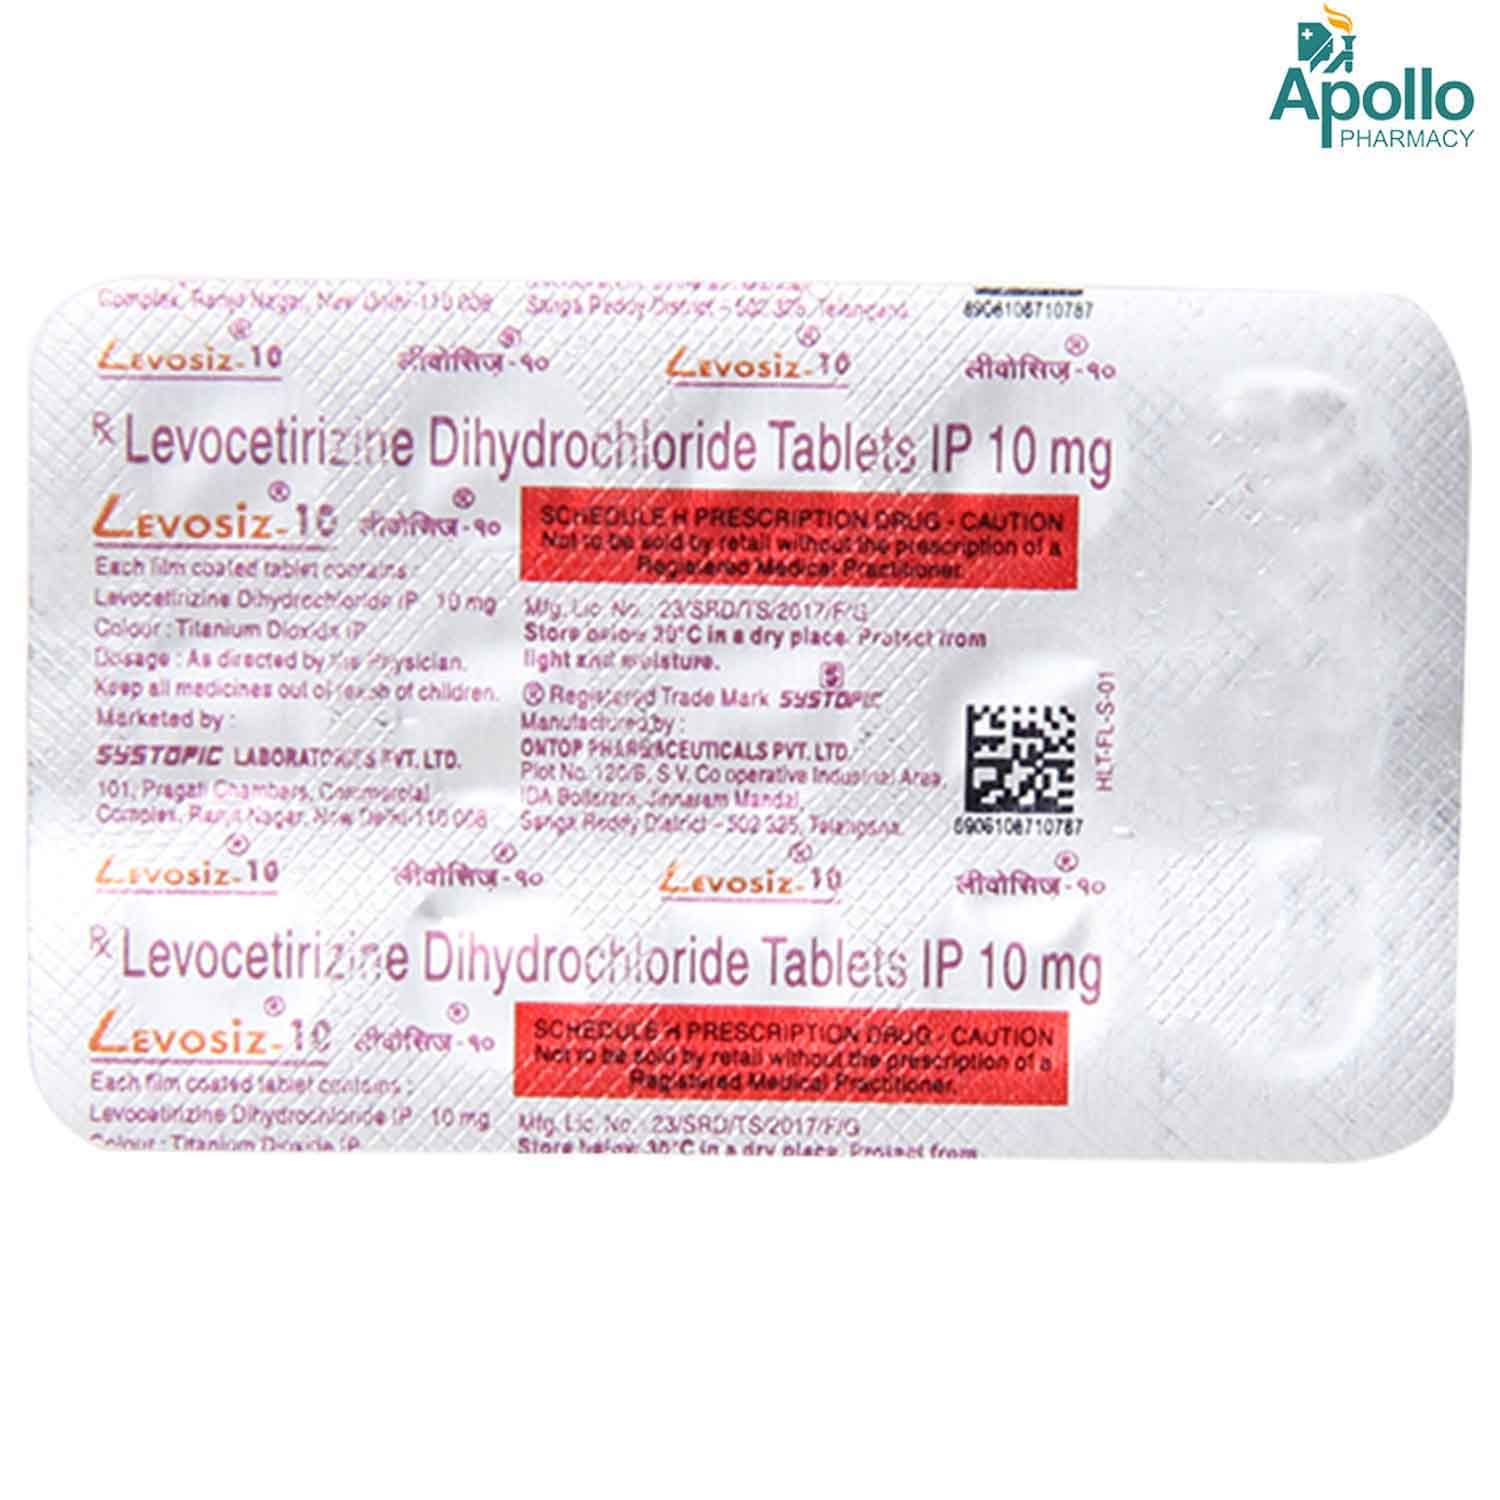 Levosiz 10 Tablet 15's Price, Uses, Side Effects, Composition - Apollo